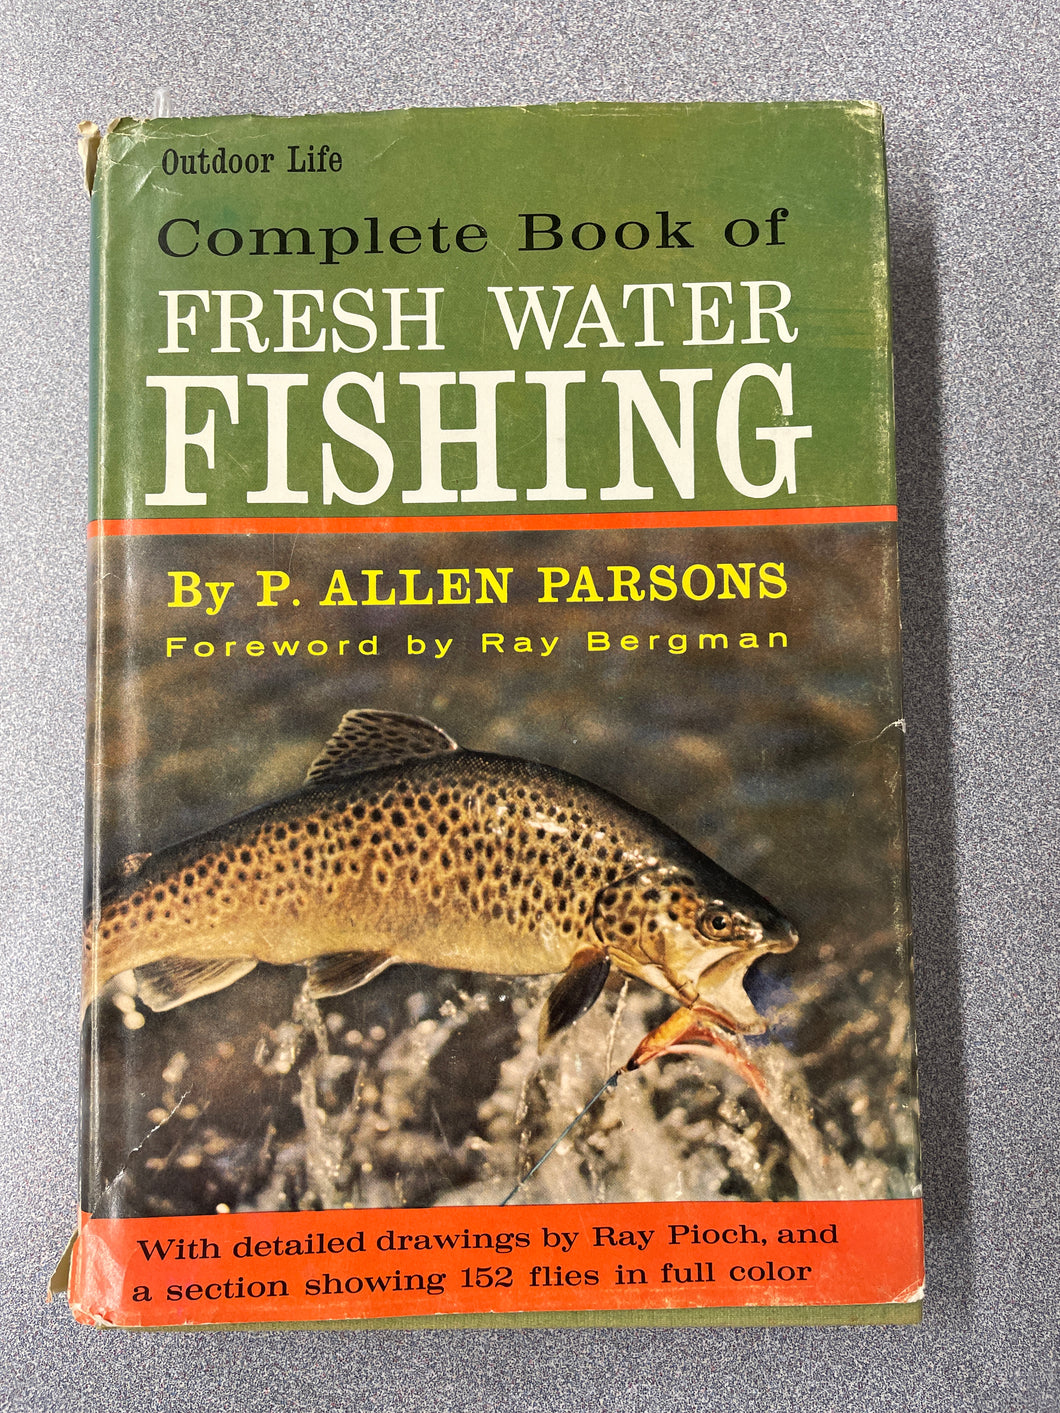 The Complete Book of Fresh Water Fishing, Parsons, P. Allen [963] CC 11/23